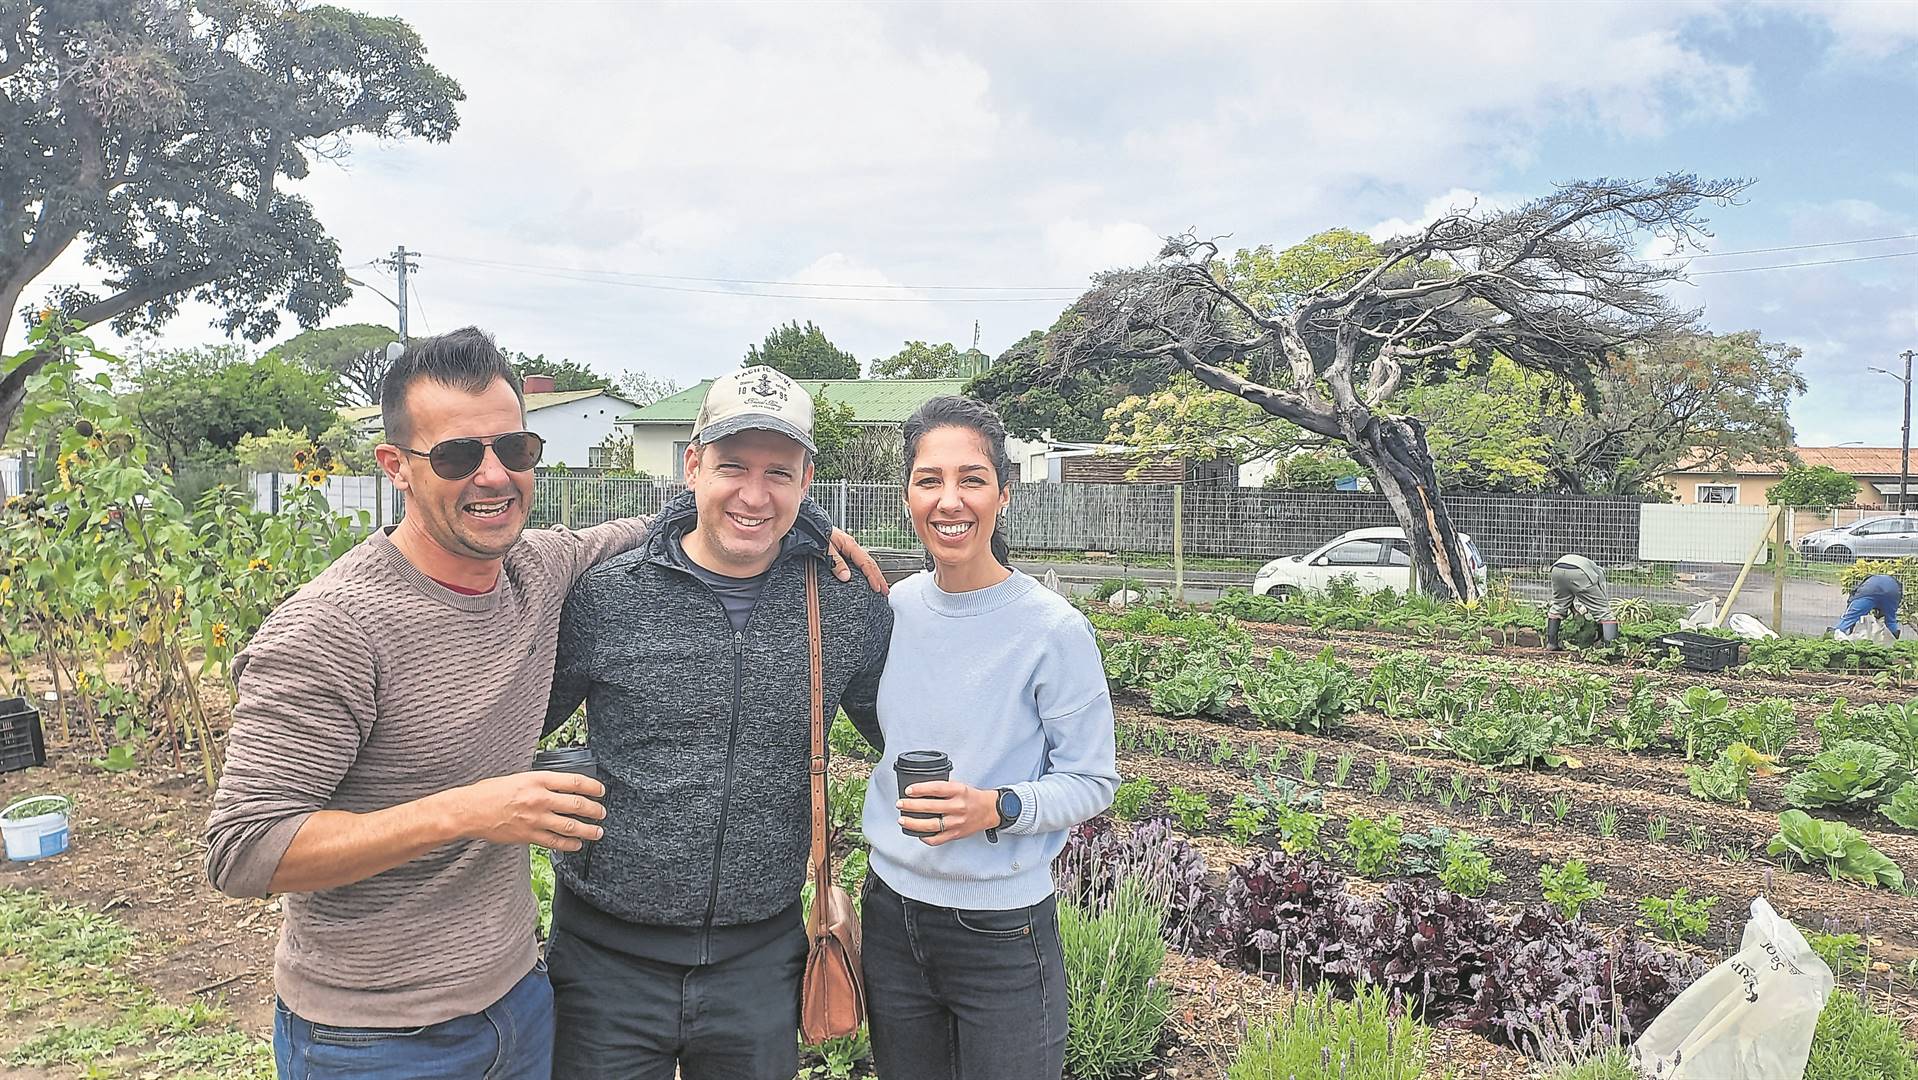 The sun shone its warm rays during Grapa’s Spring Market and greeted visitors Helgardt Boshoff, Jurie and Monita Muller, who came from Durbanville to experience the community’s organic greens.PHOTOS: Heleen Rossouw